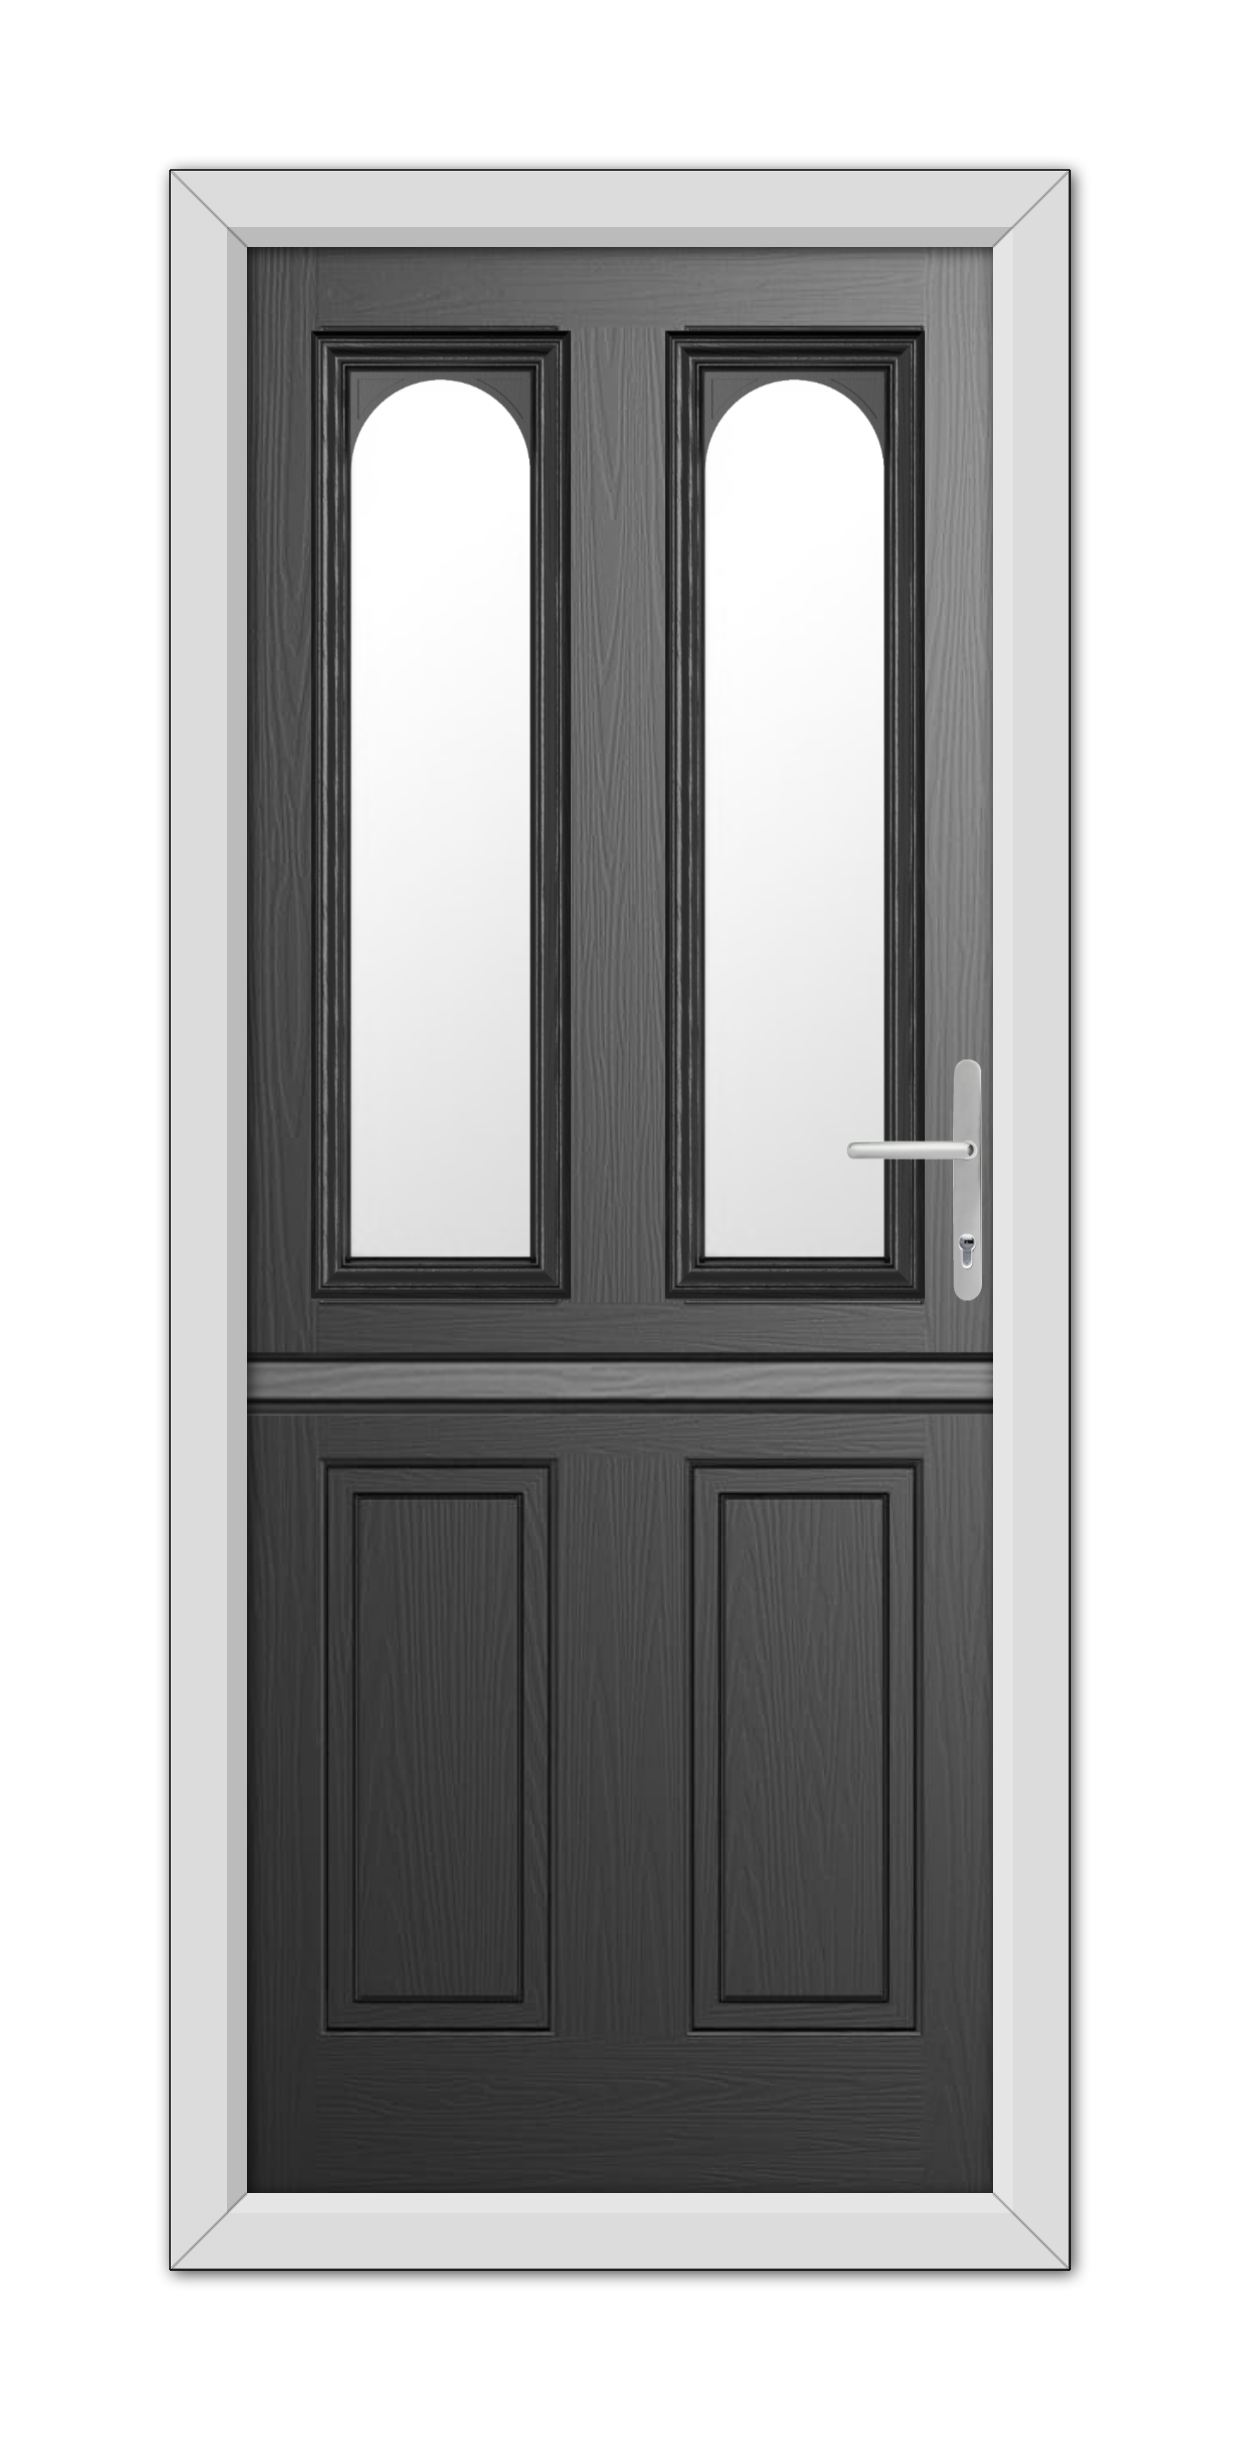 Black Elmhurst Stable Composite Door 48mm Timber Core with a modern design featuring a dark wood finish, two vertical glass panels, and a silver handle, set in a white frame.